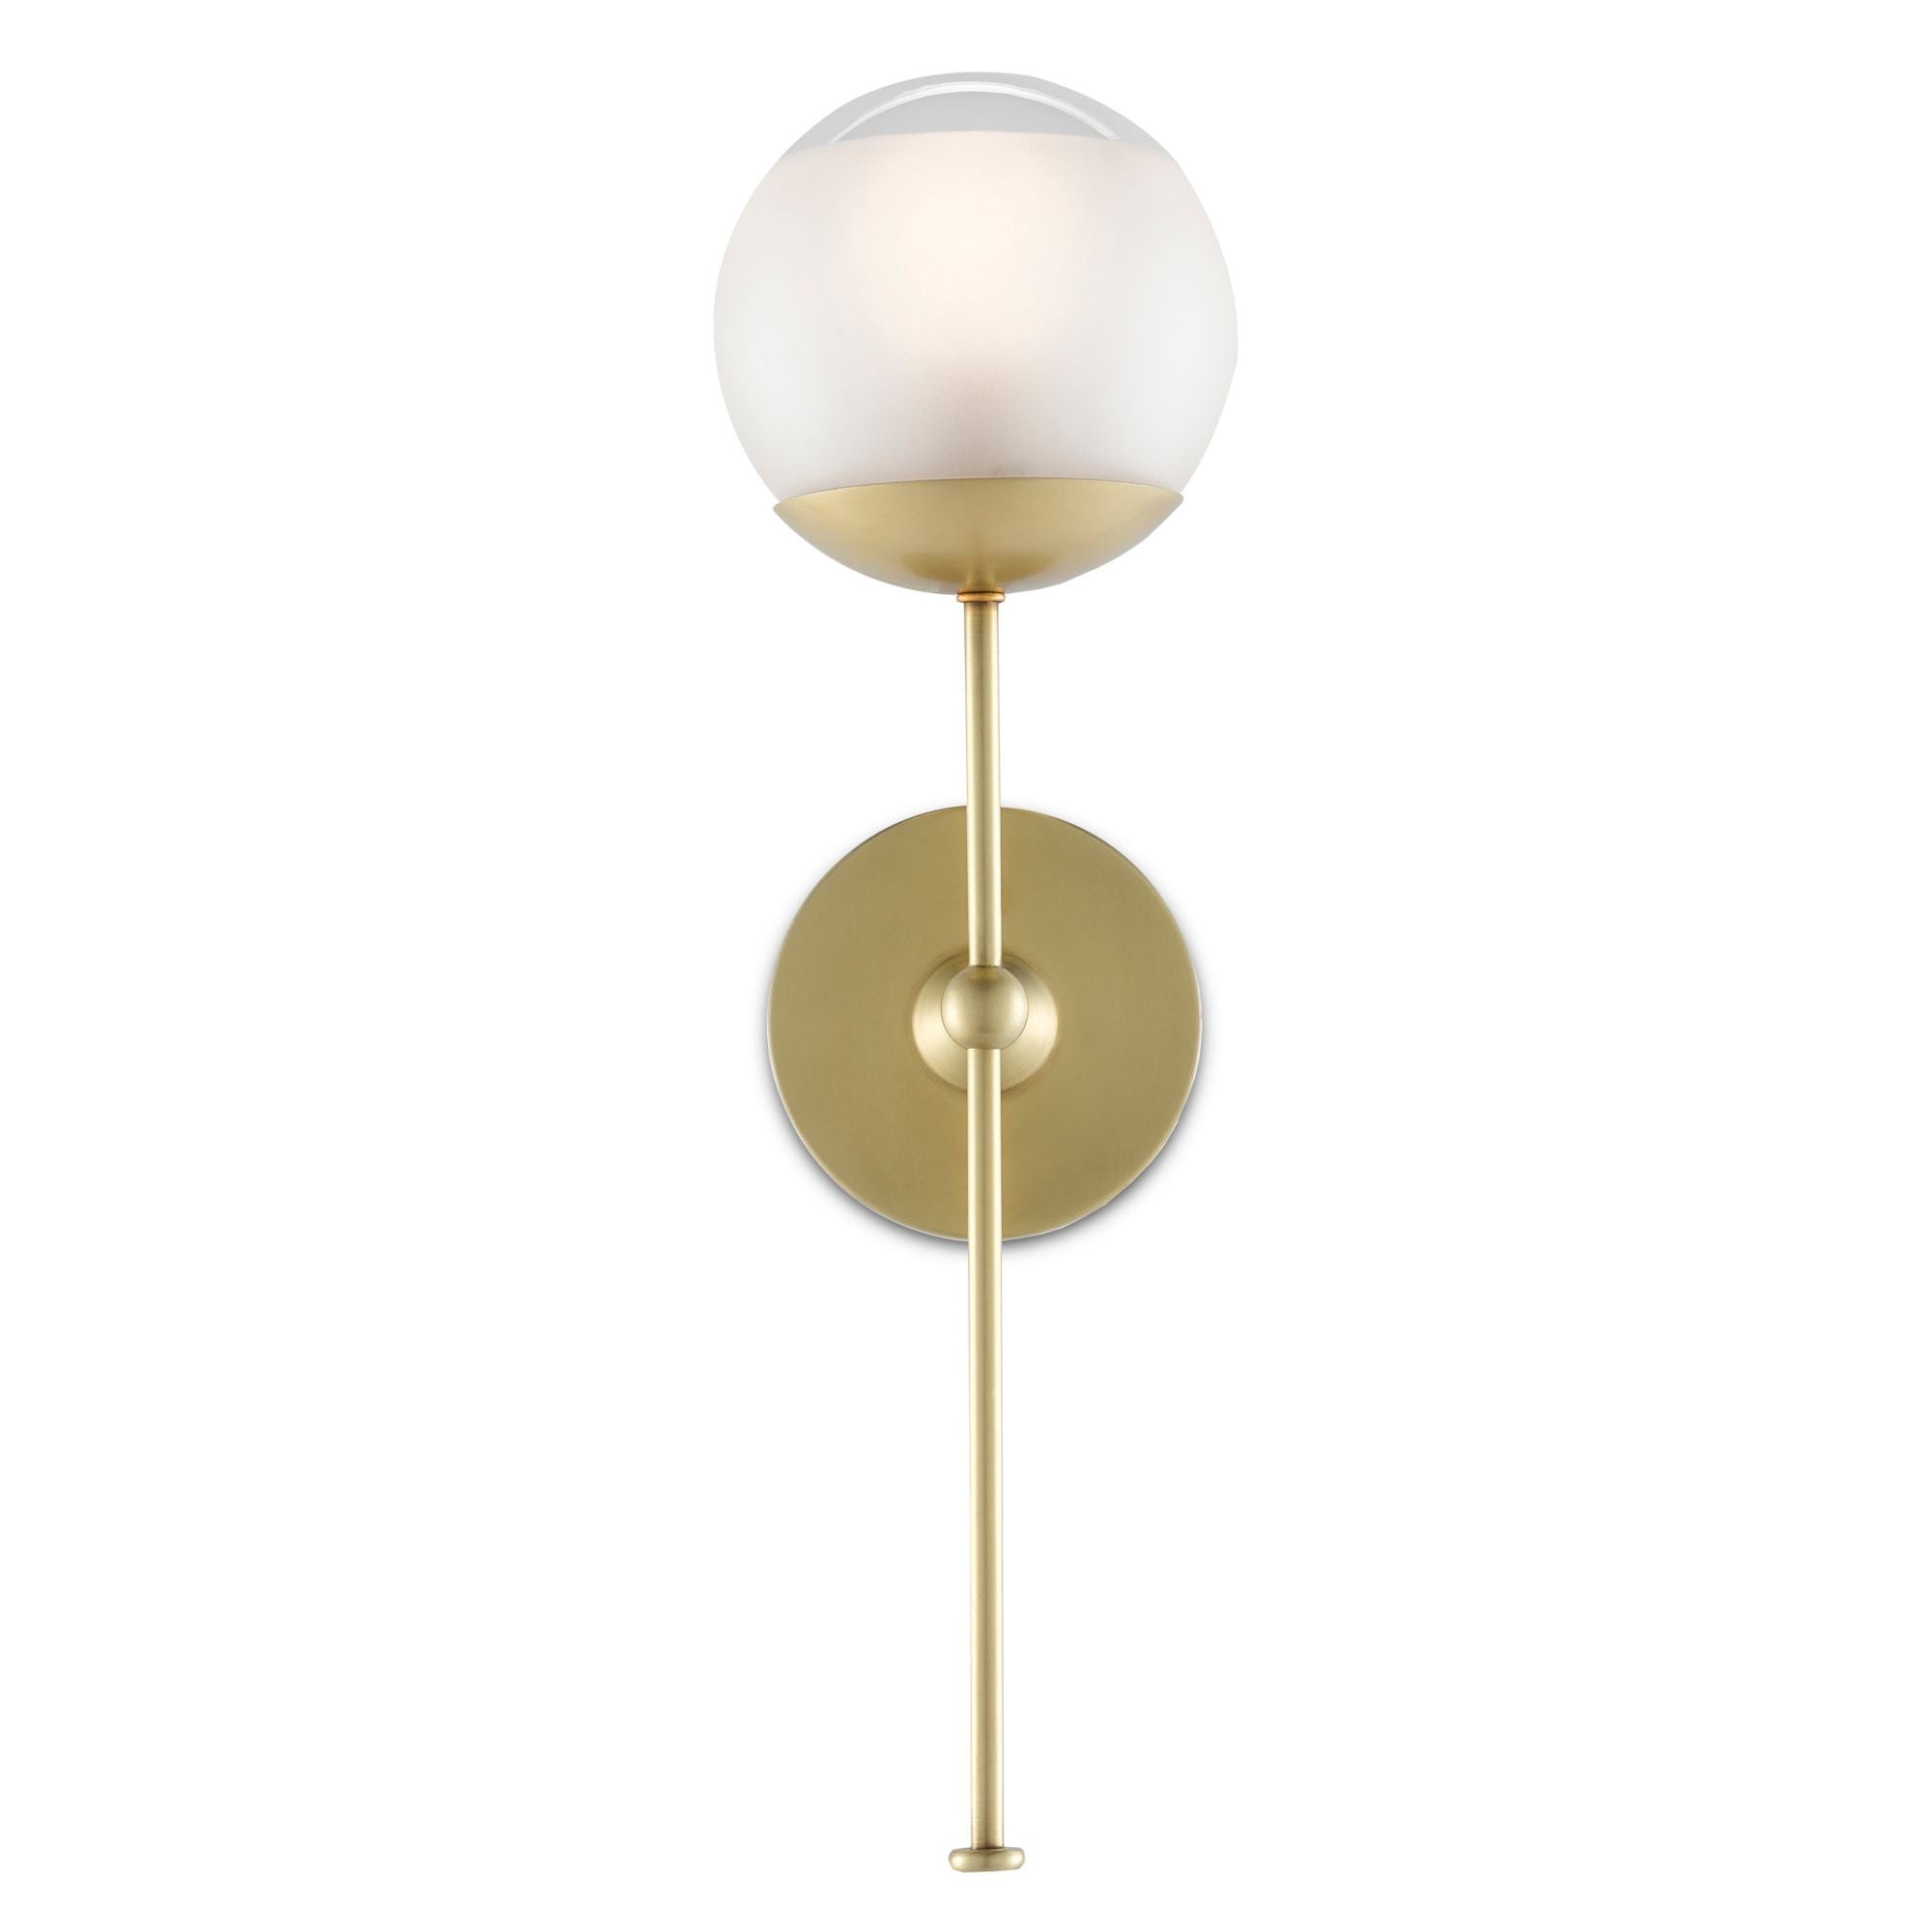 Montview Brass Wall Sconce - Brushed Brass